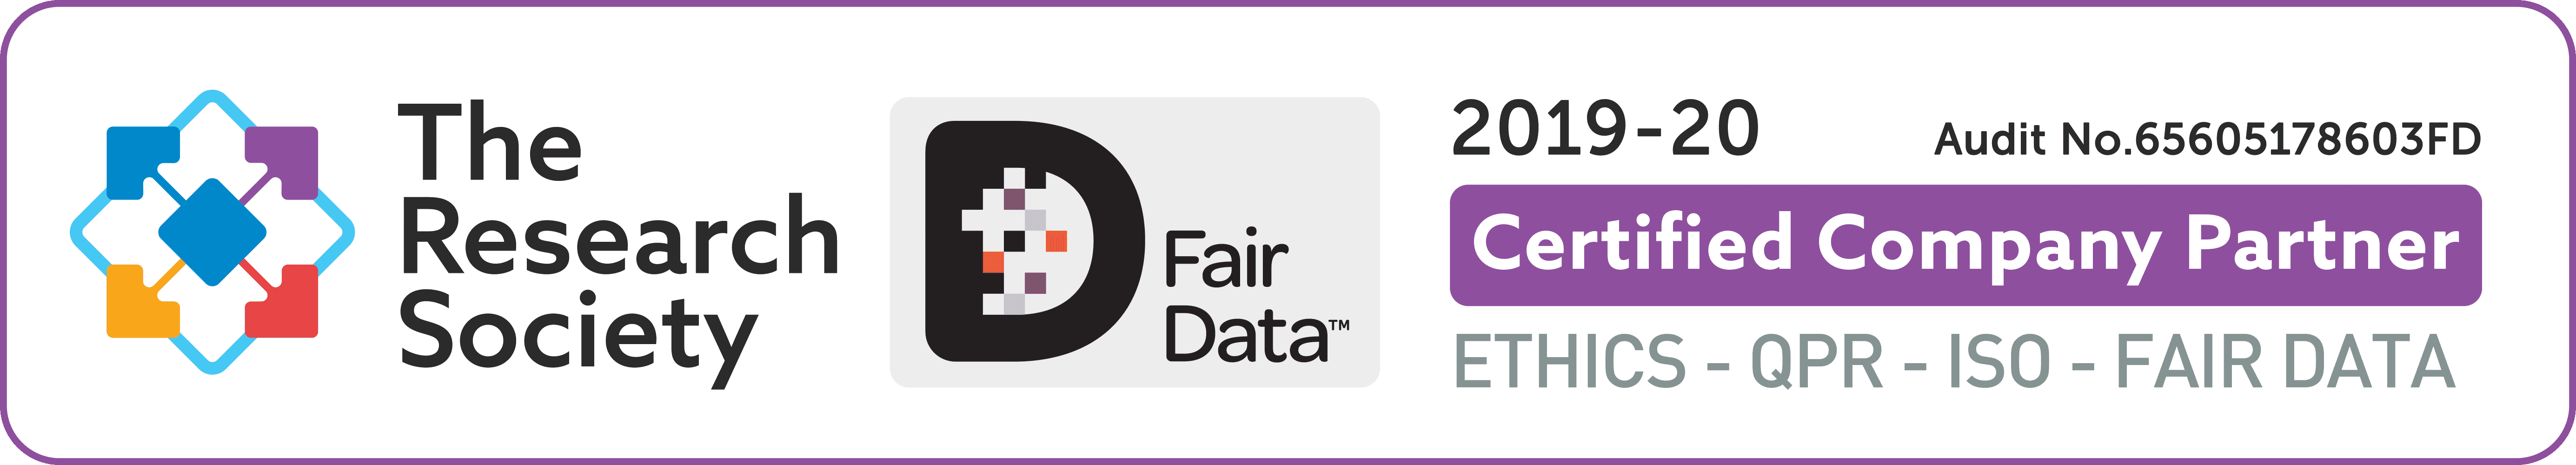 The Research Society and Fair Data - logo